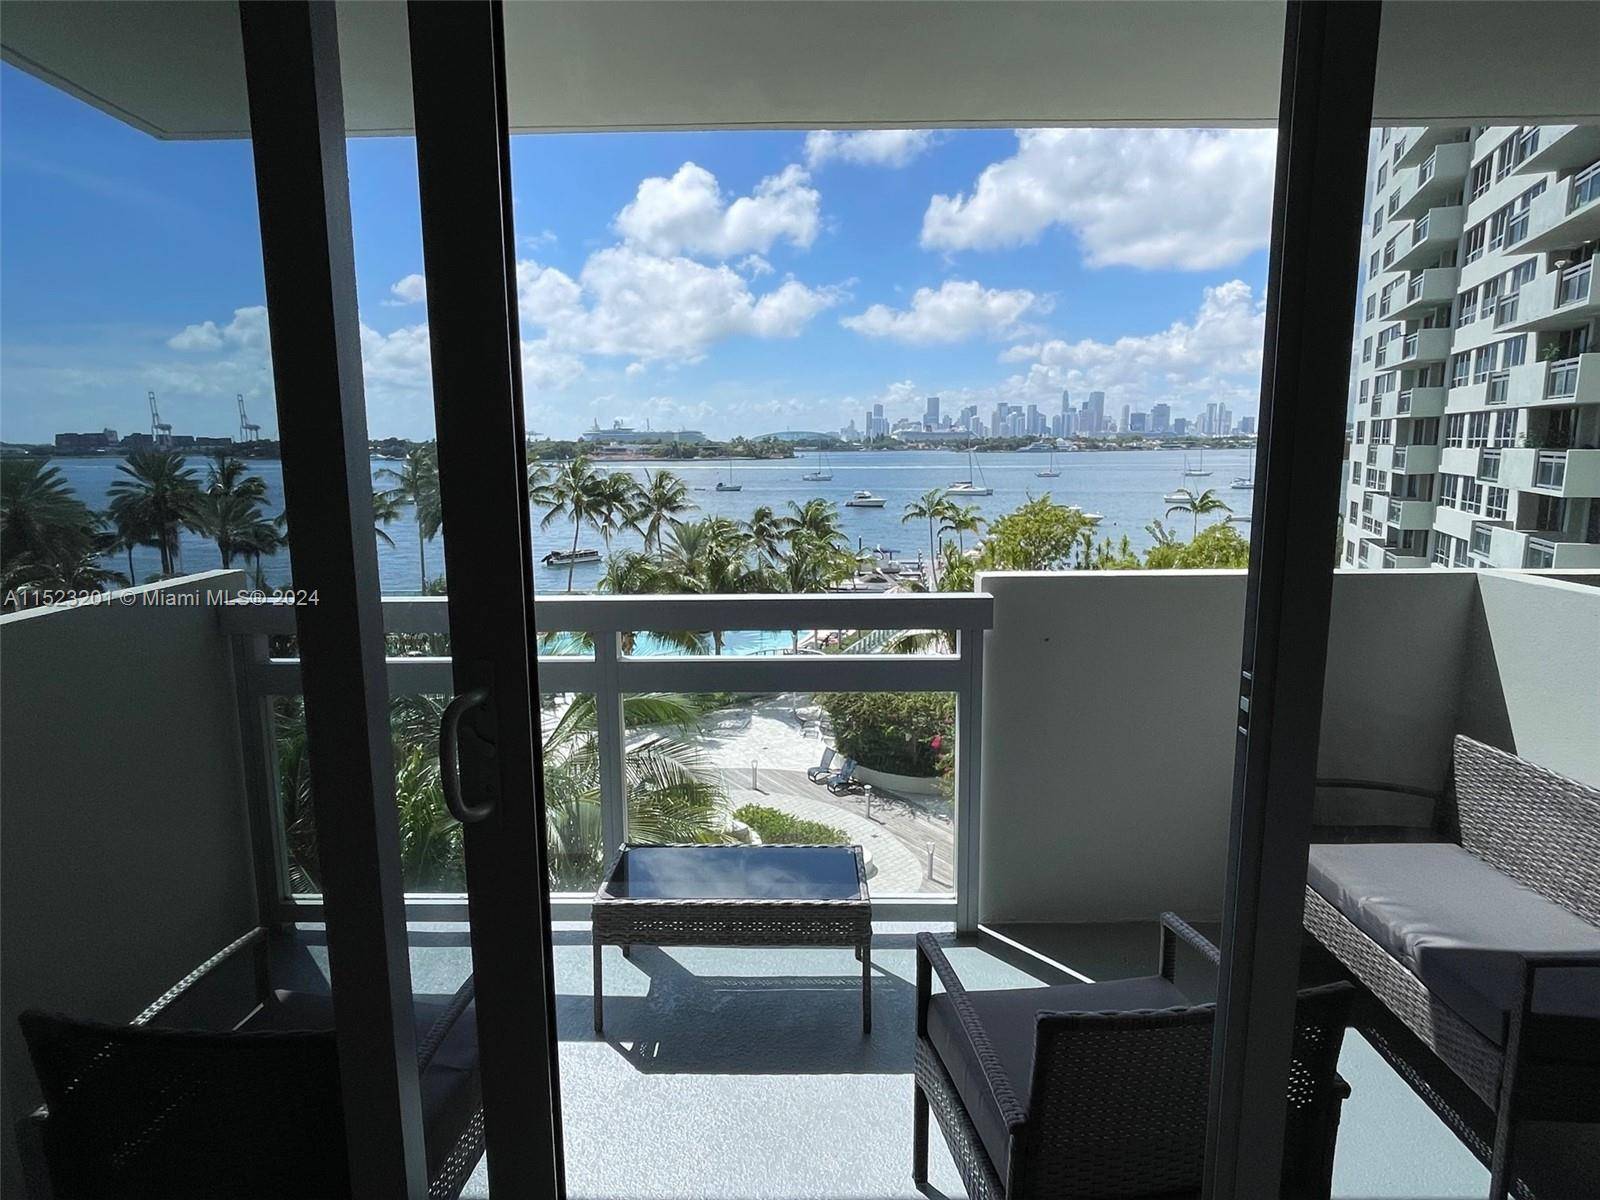 2bed 2bath unit with Amazing Views of the Bay Downtown Skyline.